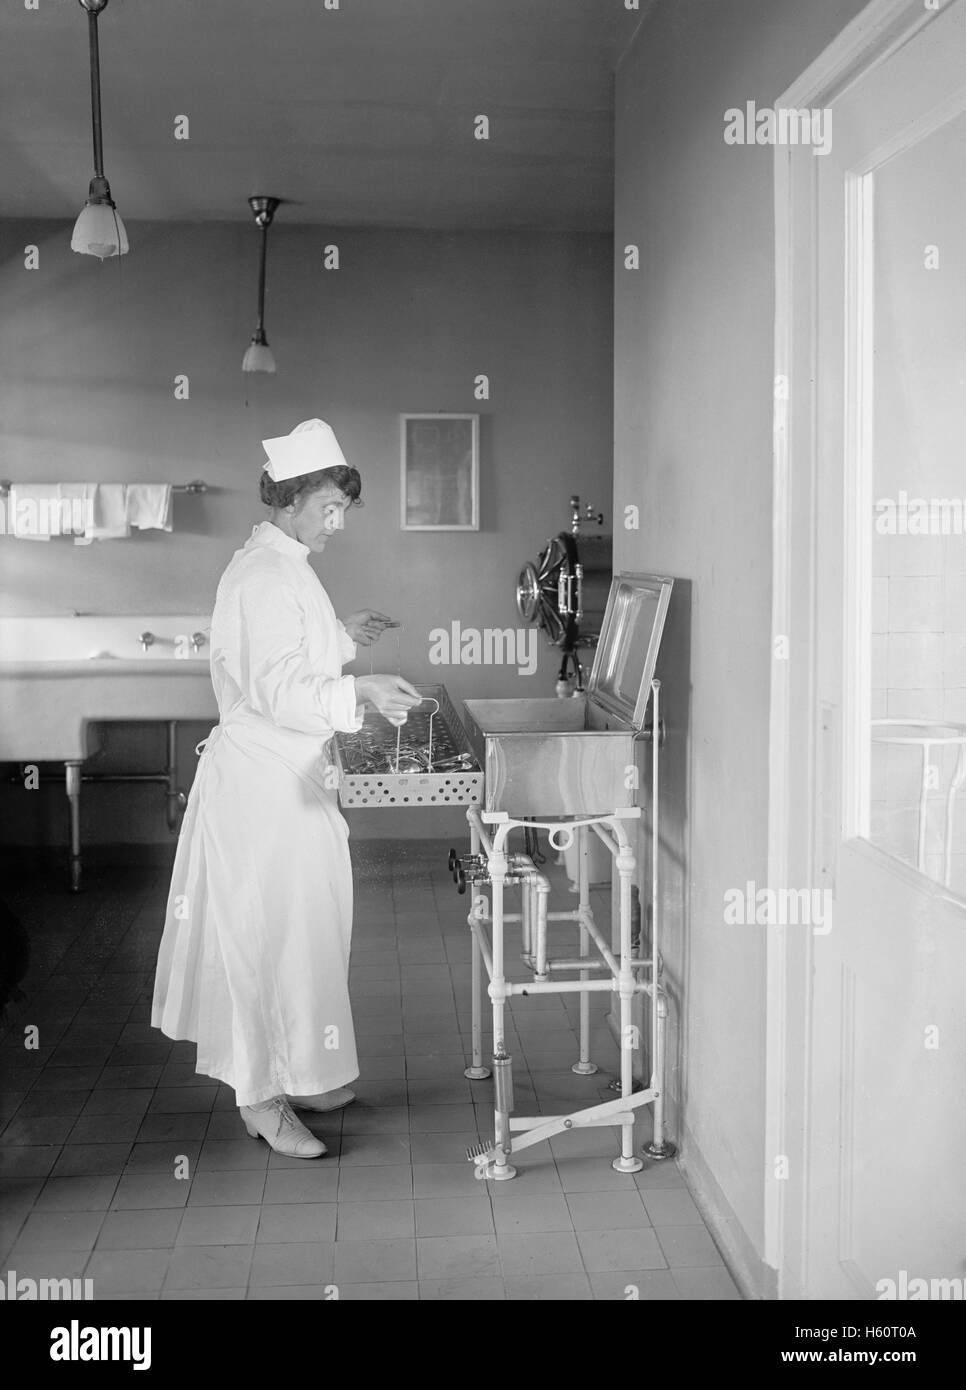 Nurse with Medical Instruments in Hospital, USA, National Photo Company, 1922 Stock Photo